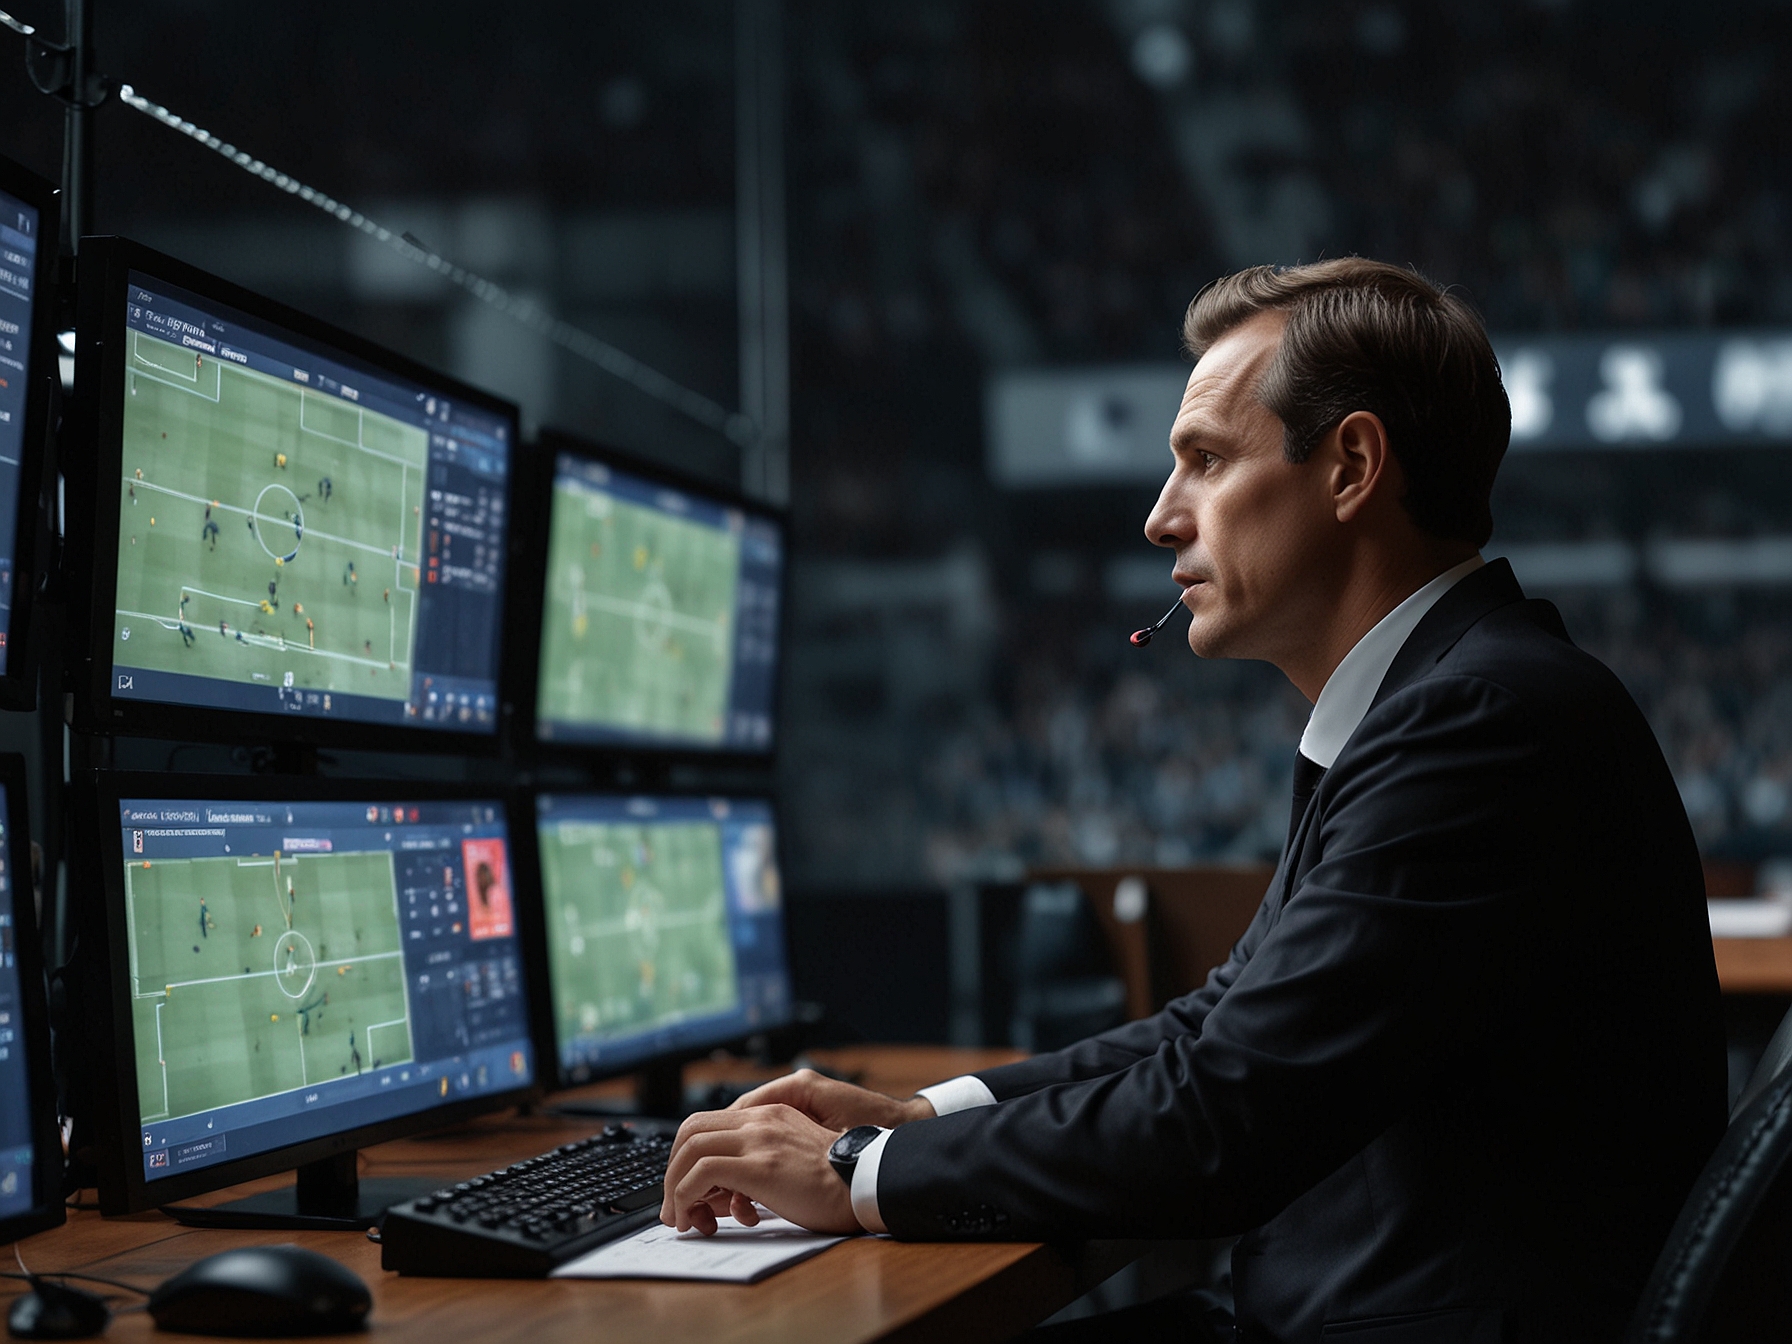 A VAR official evaluating a potential offside during the match, with multiple screens and precise technology highlighting the slim margins that lead to disallowed goals.